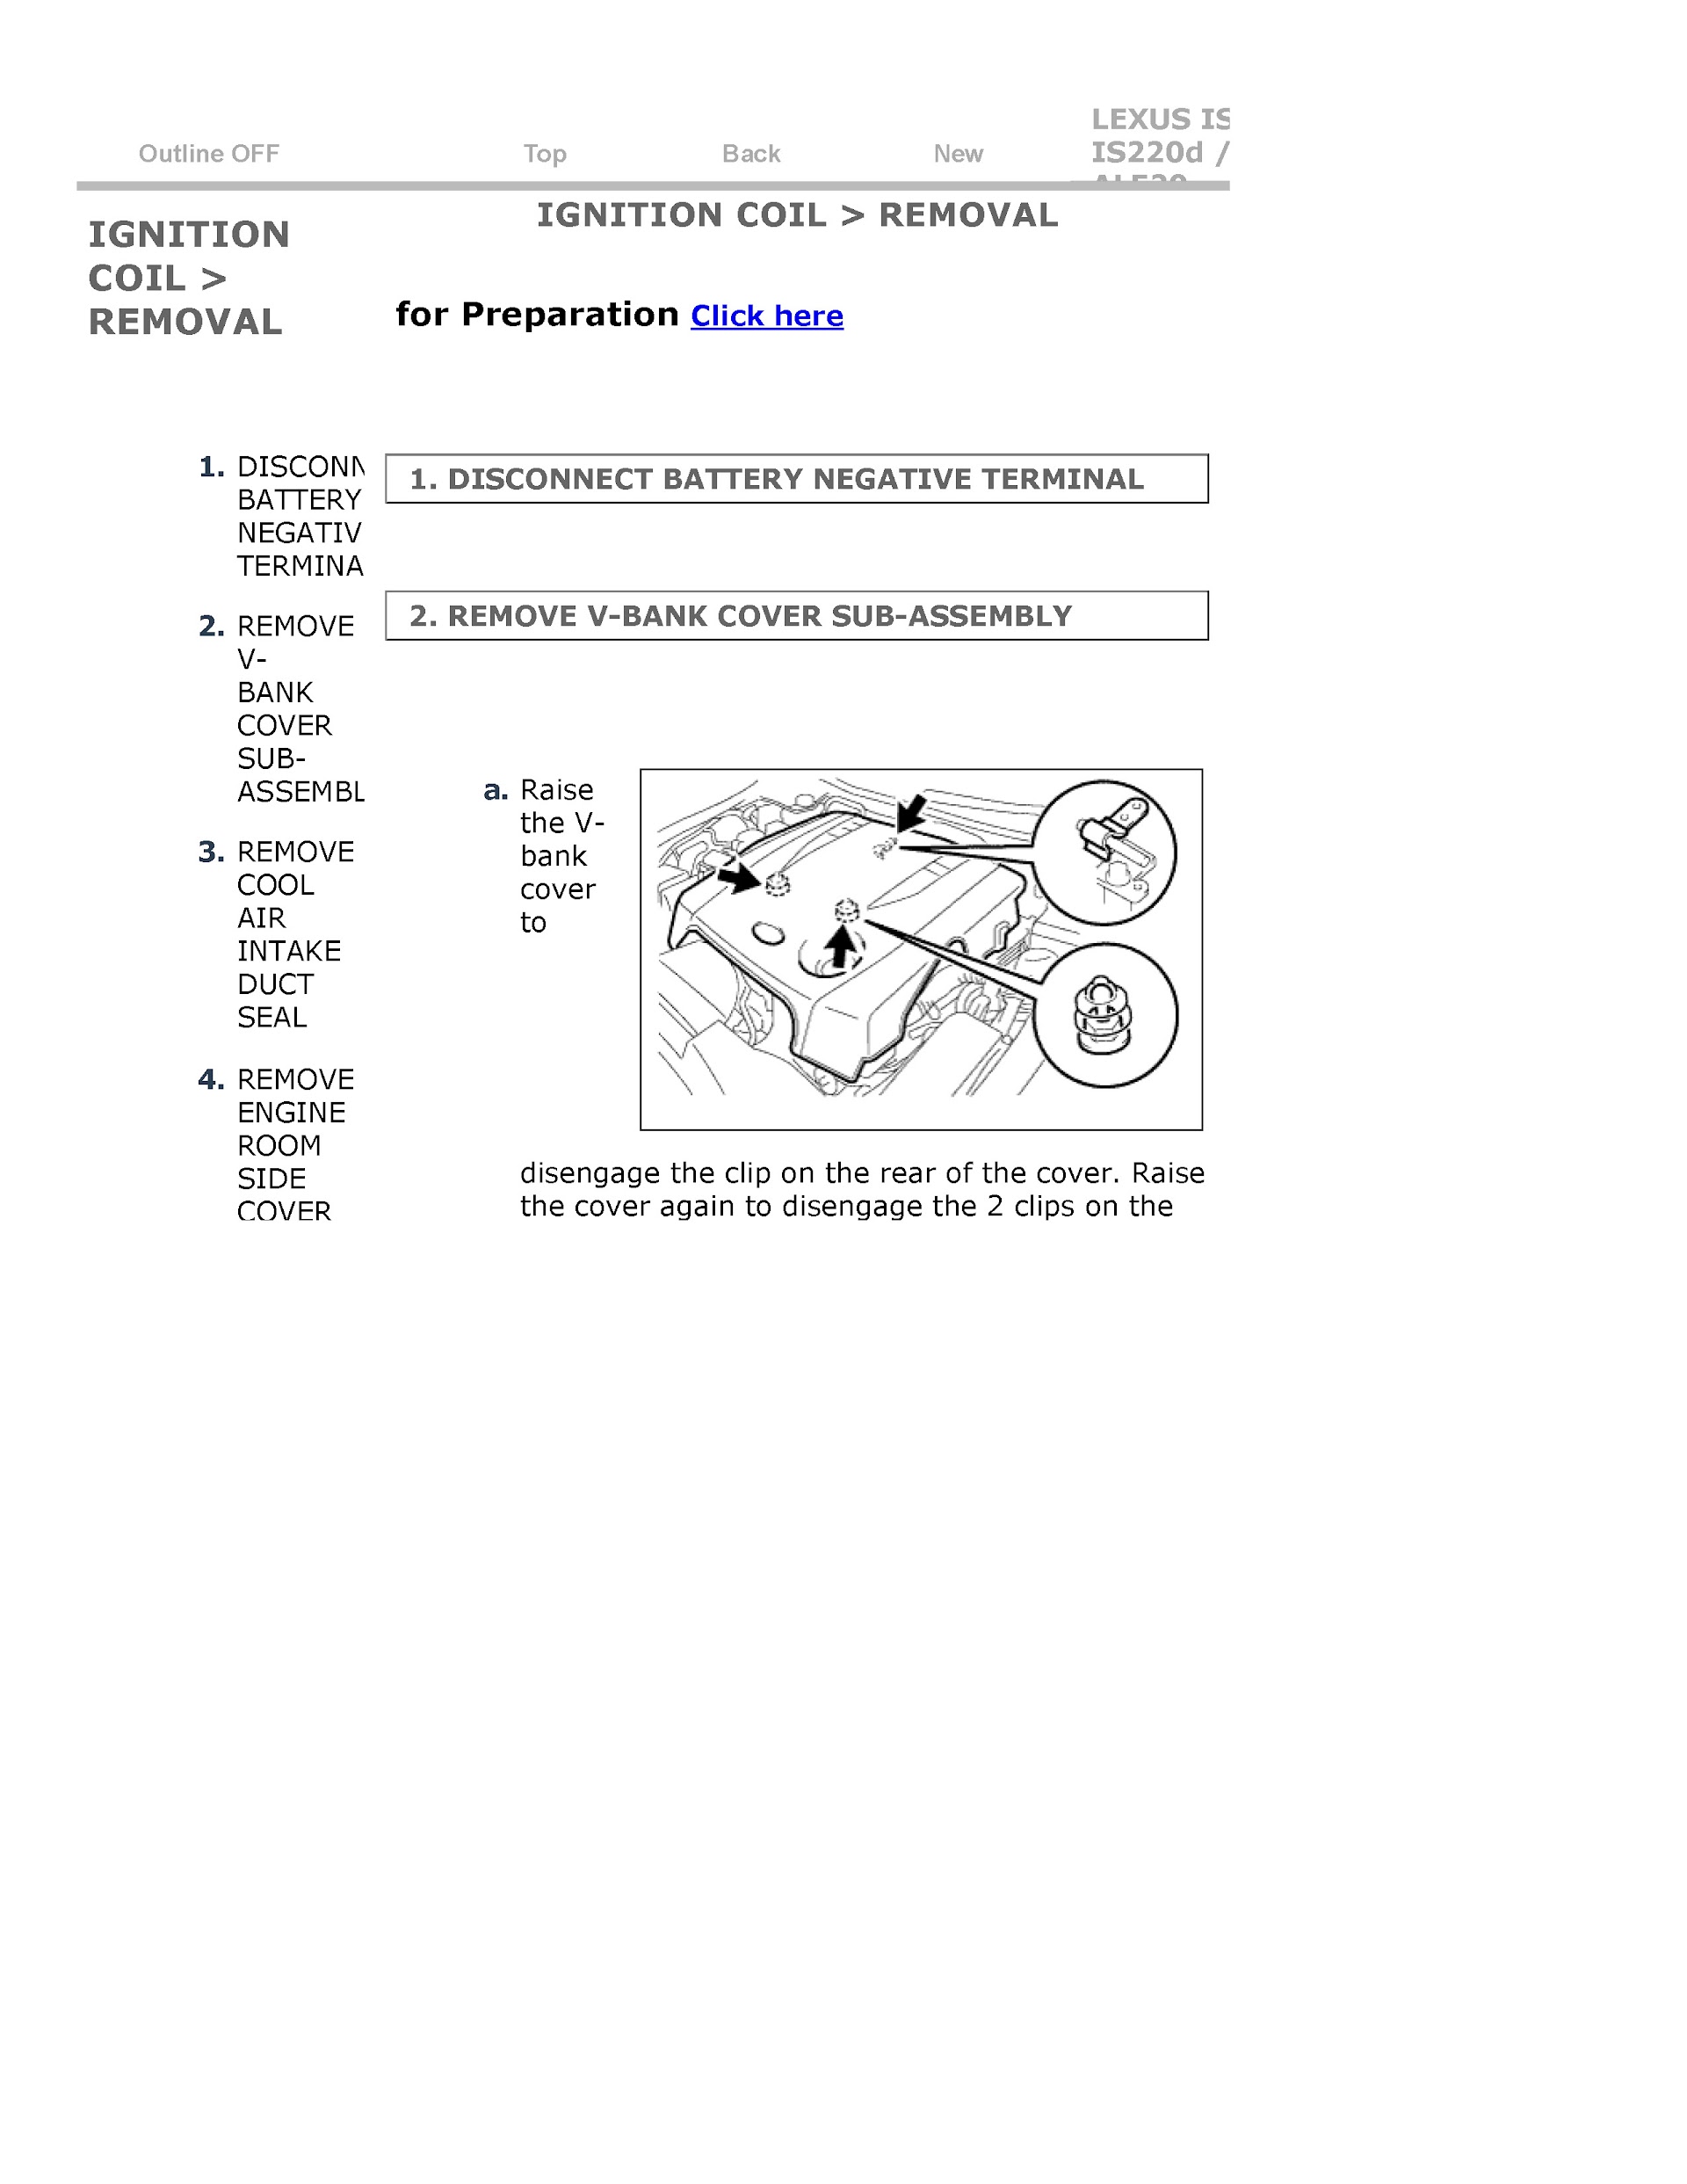 2007 Lexus IS250 IS220D Repair Manual, Ignition Coil Removal